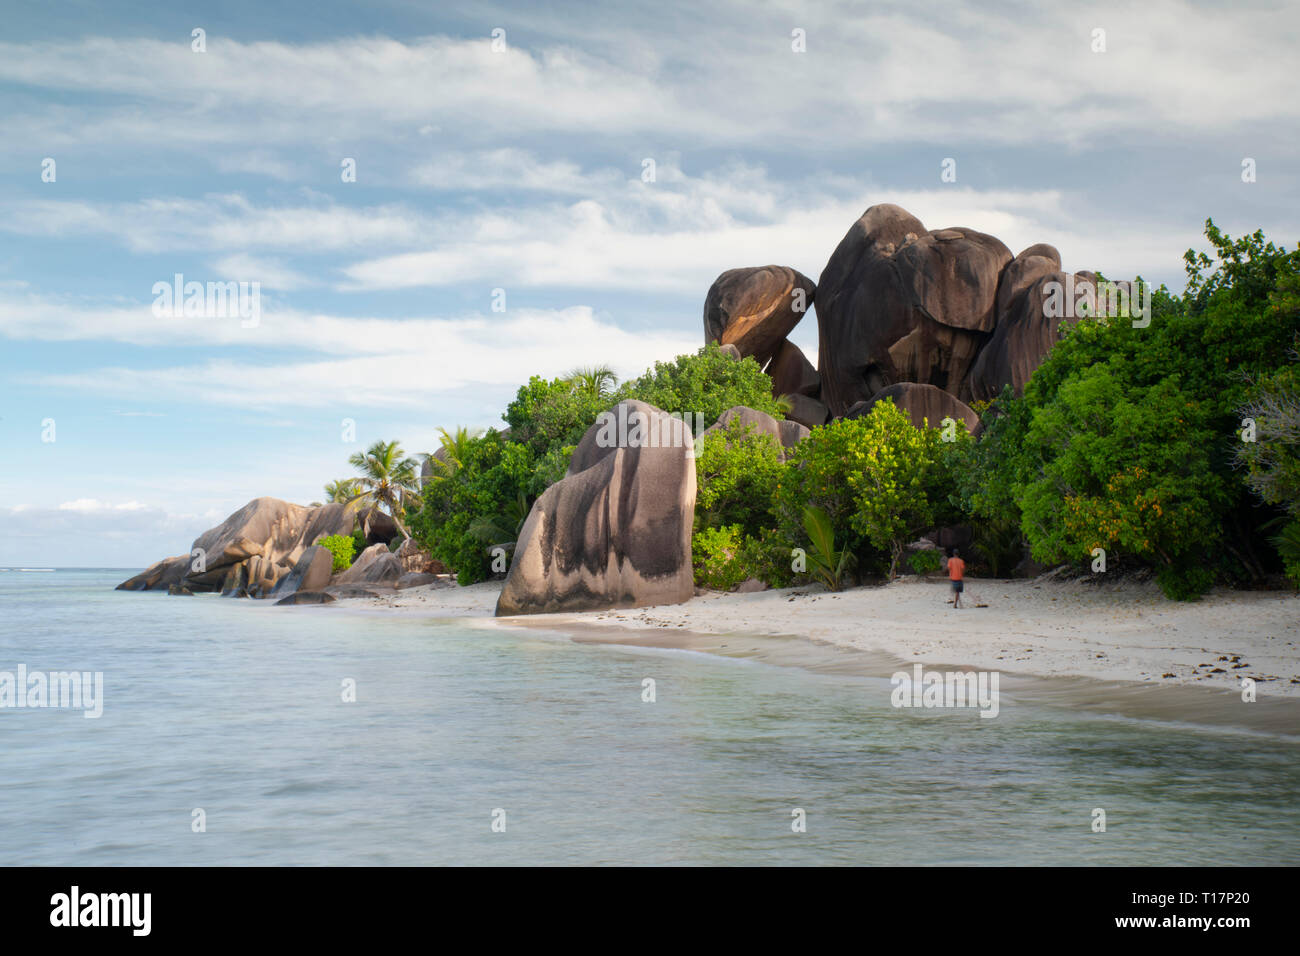 A man raking seaweed in front of dramatic limestone rock formations at L’Anse Source d’Argent, L’Union Estate Park, La Digue, the Seychelles Stock Photo